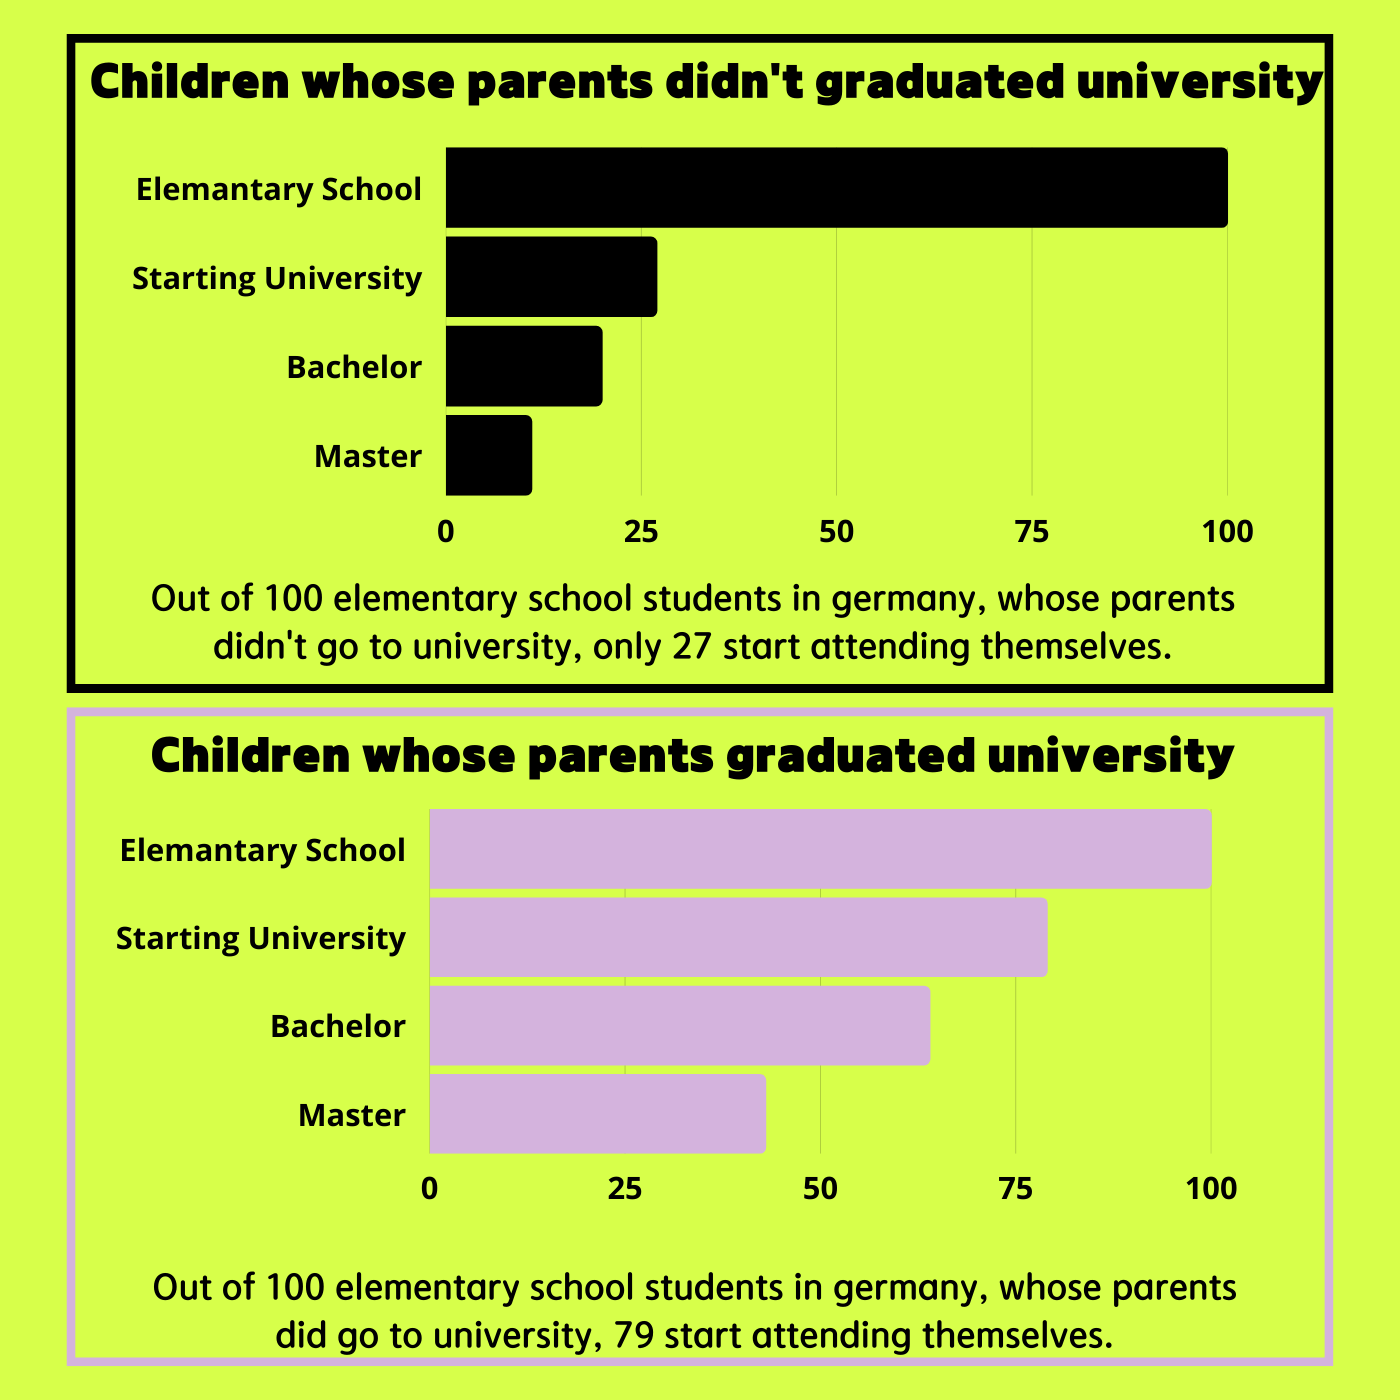 showing that children with parents from a non-academic background rarely go to uiniversity